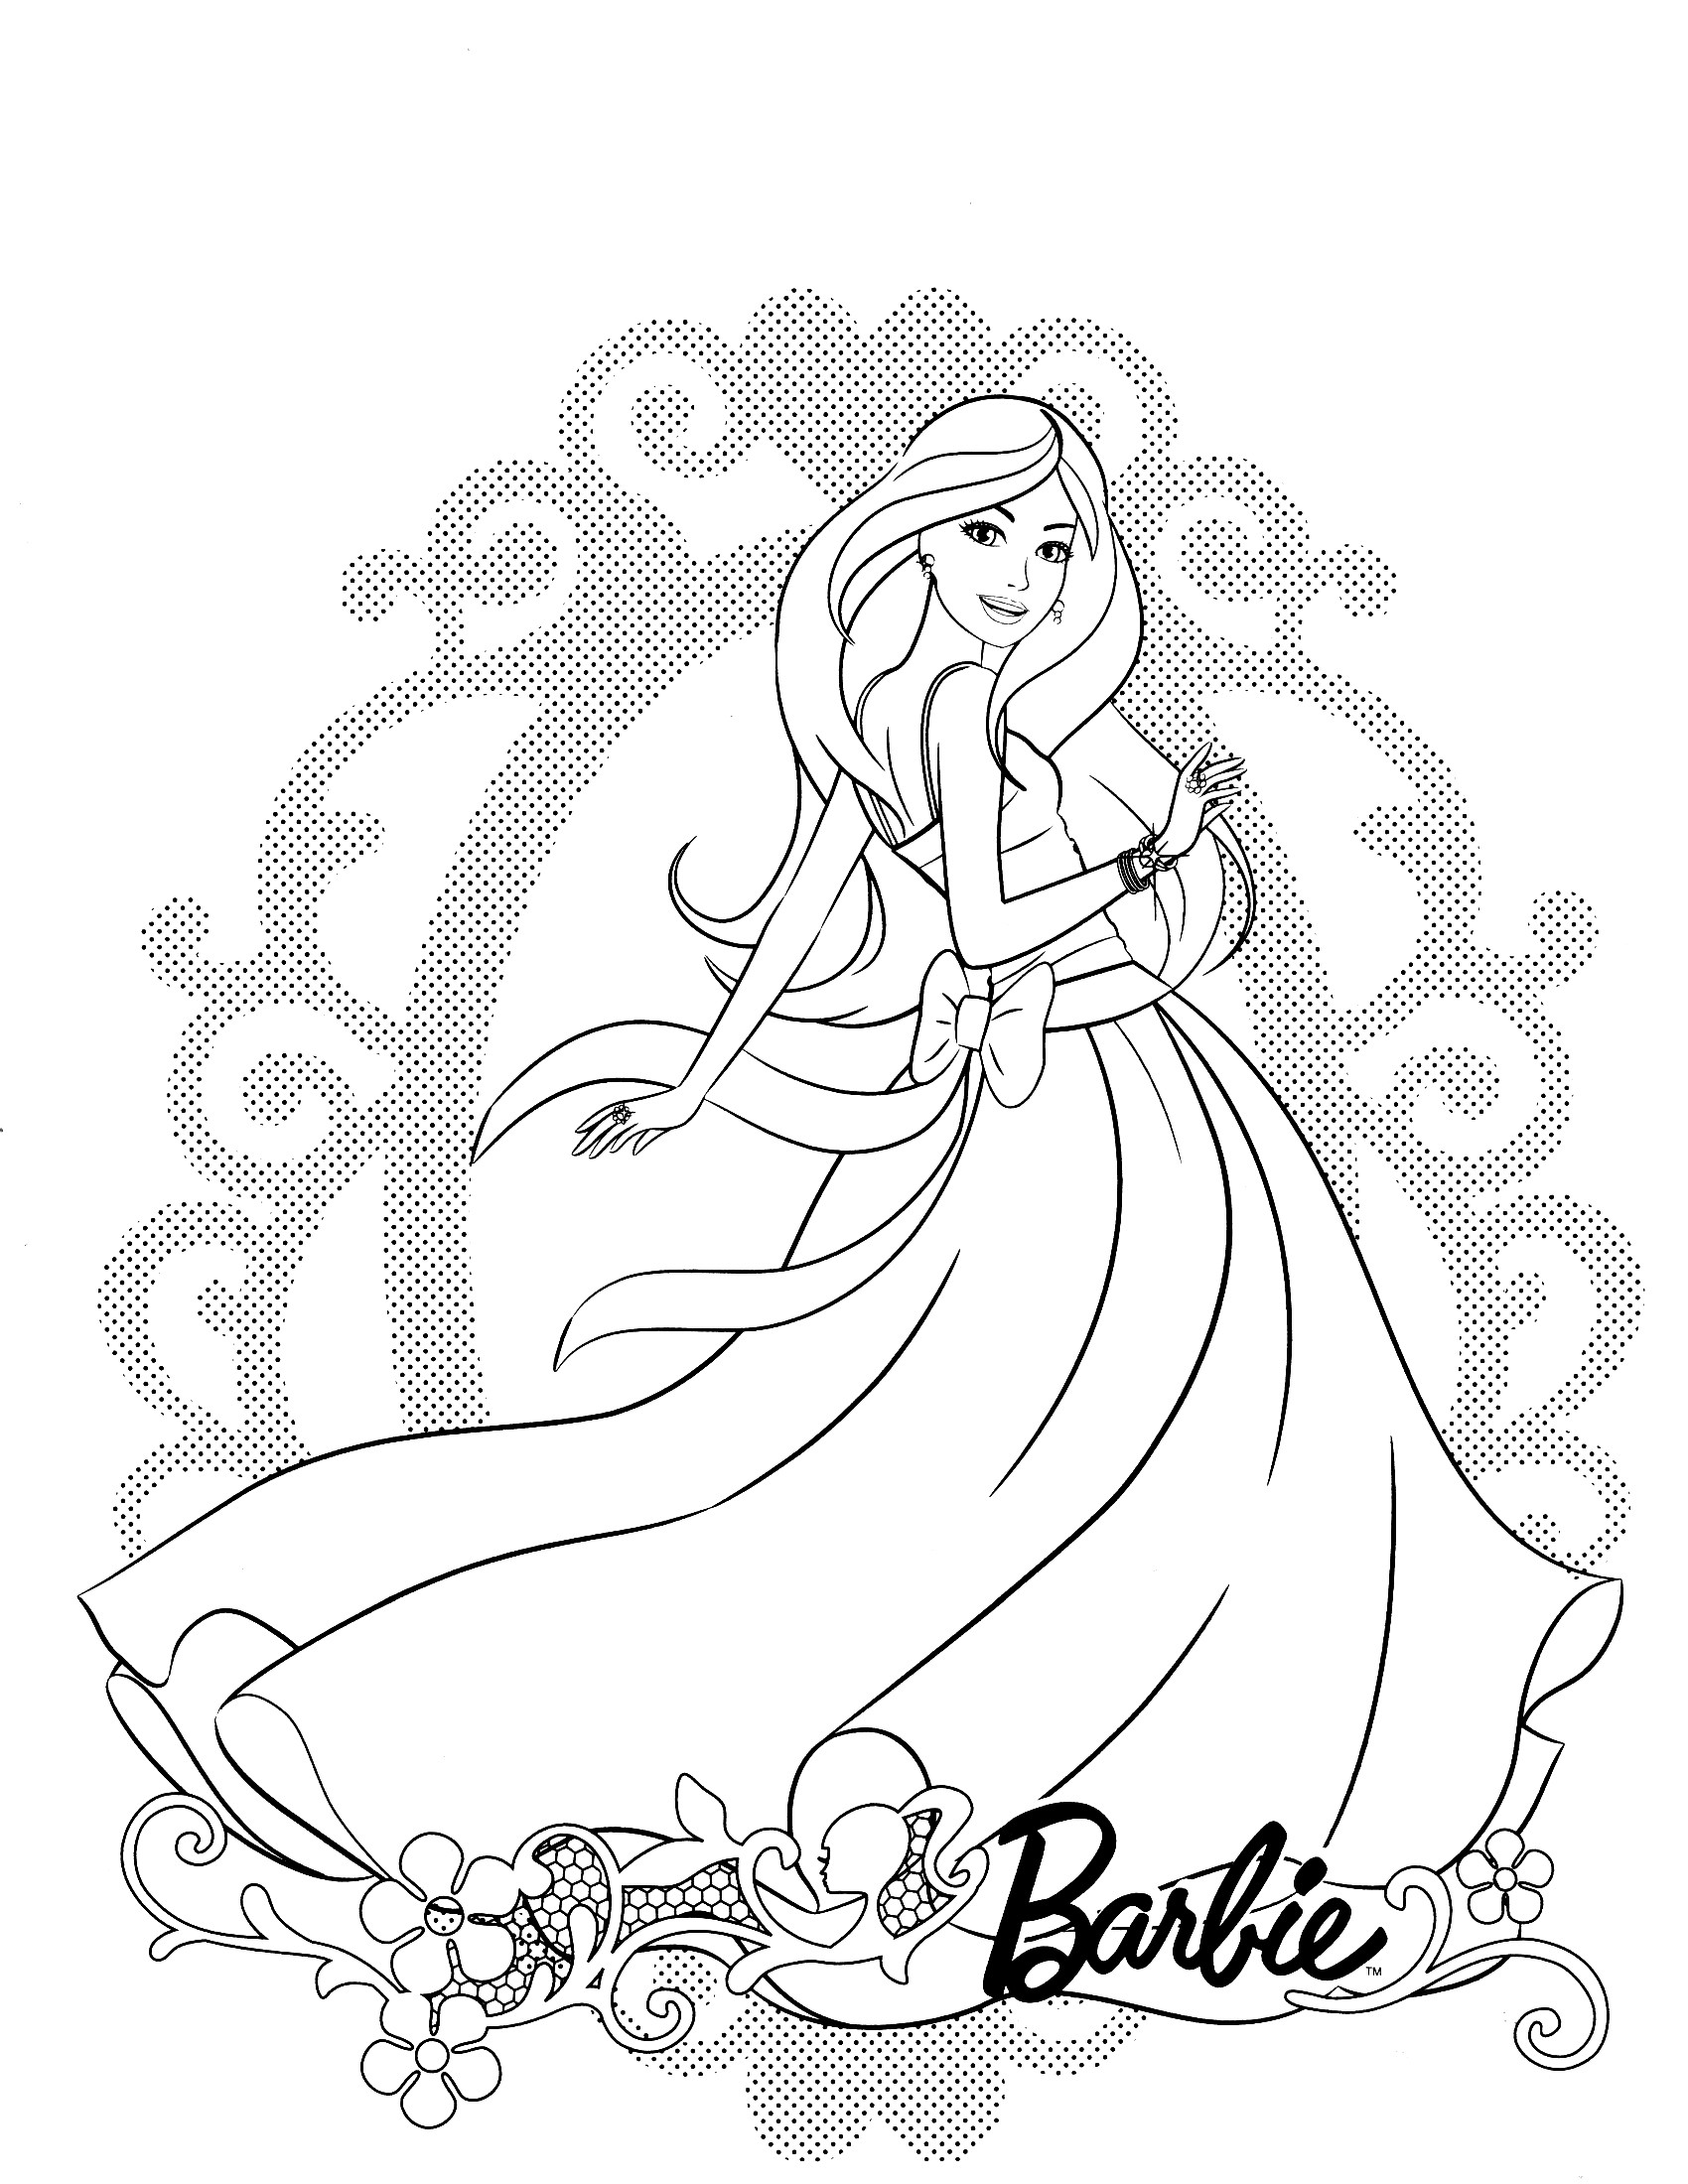 1700x2200 Barbie Dream House Coloring Pages | Coloring pages wallpaper